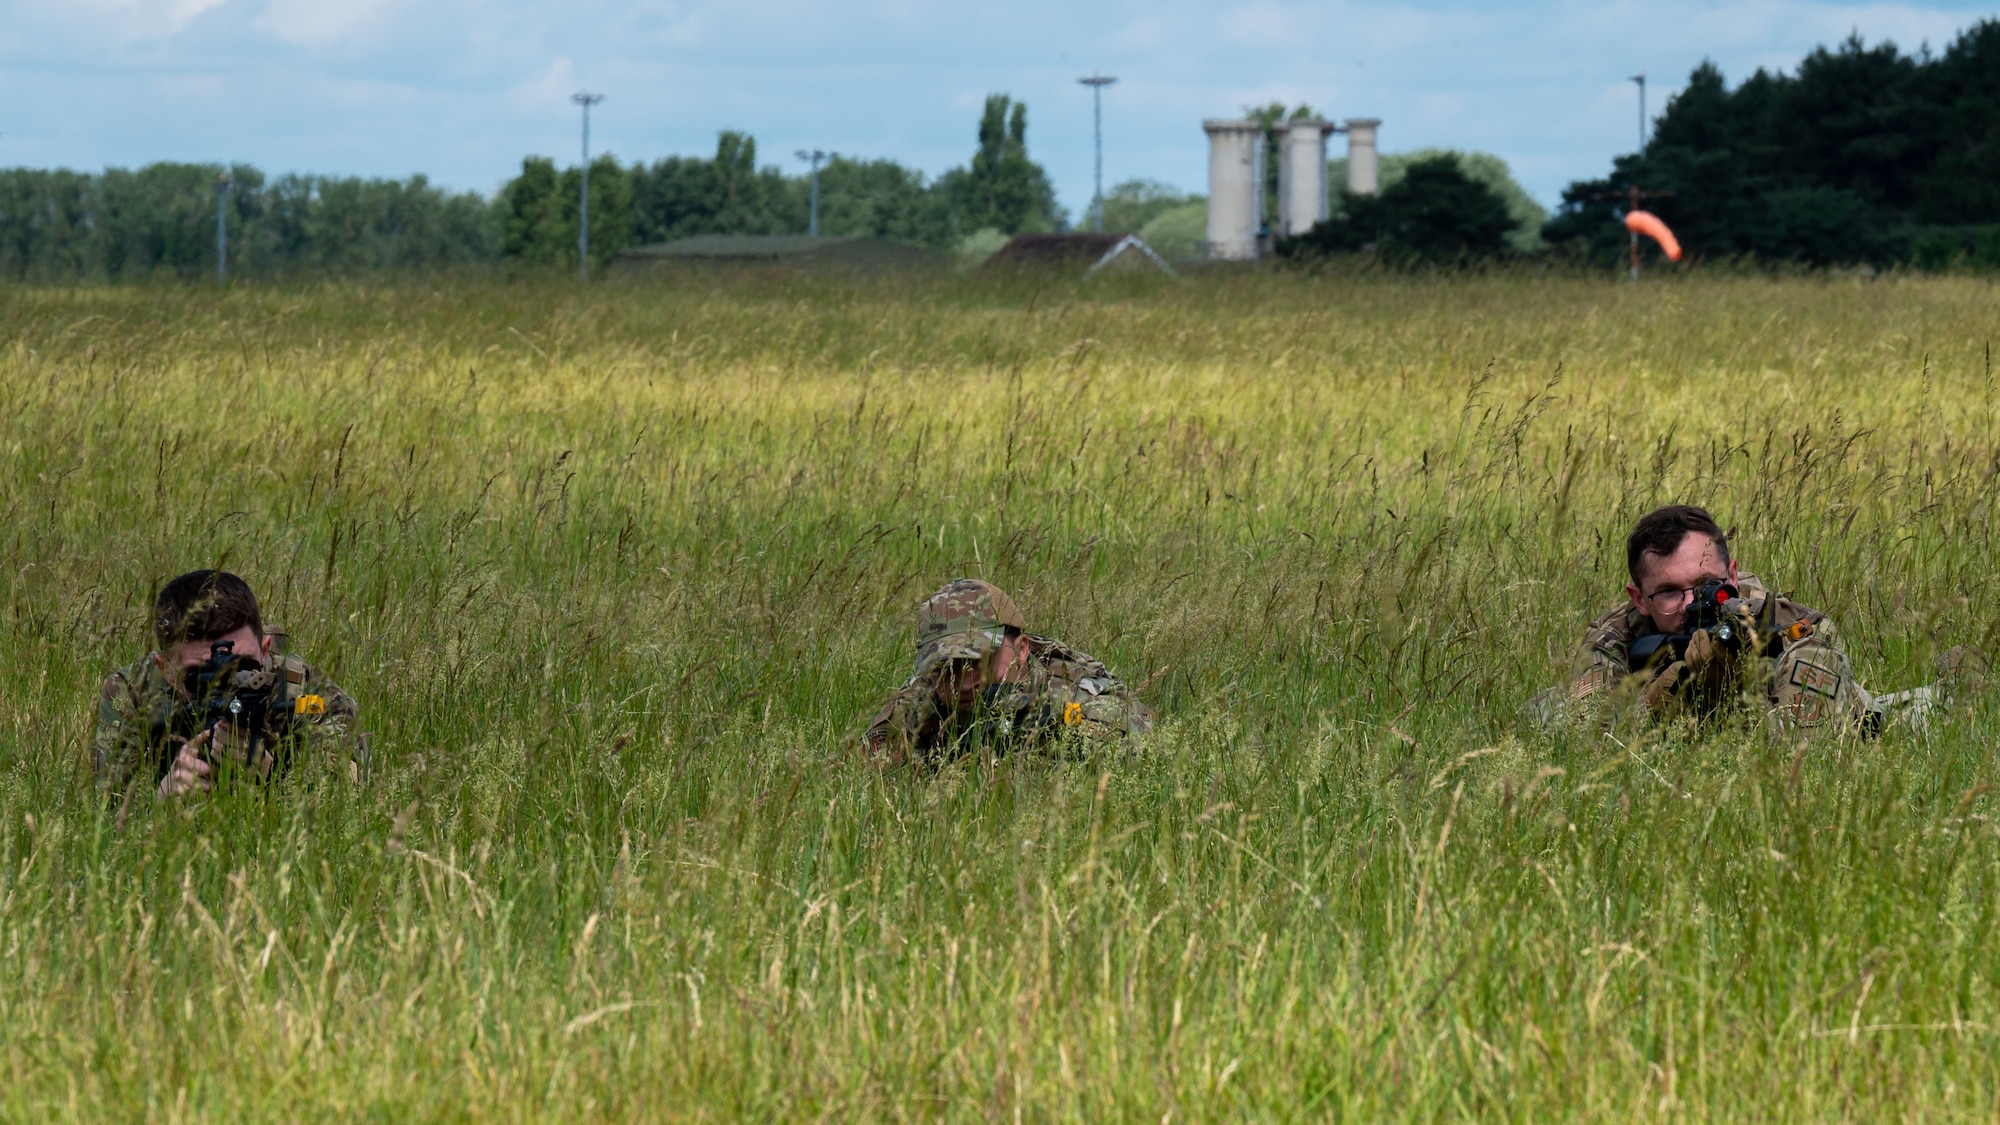 U.S. Air Force Airmen assigned to the 100th Security Forces Squadron, prepare to fire from a concealed position during a training exercise at Royal Air Force Mildenhall, England, June 21, 2023.